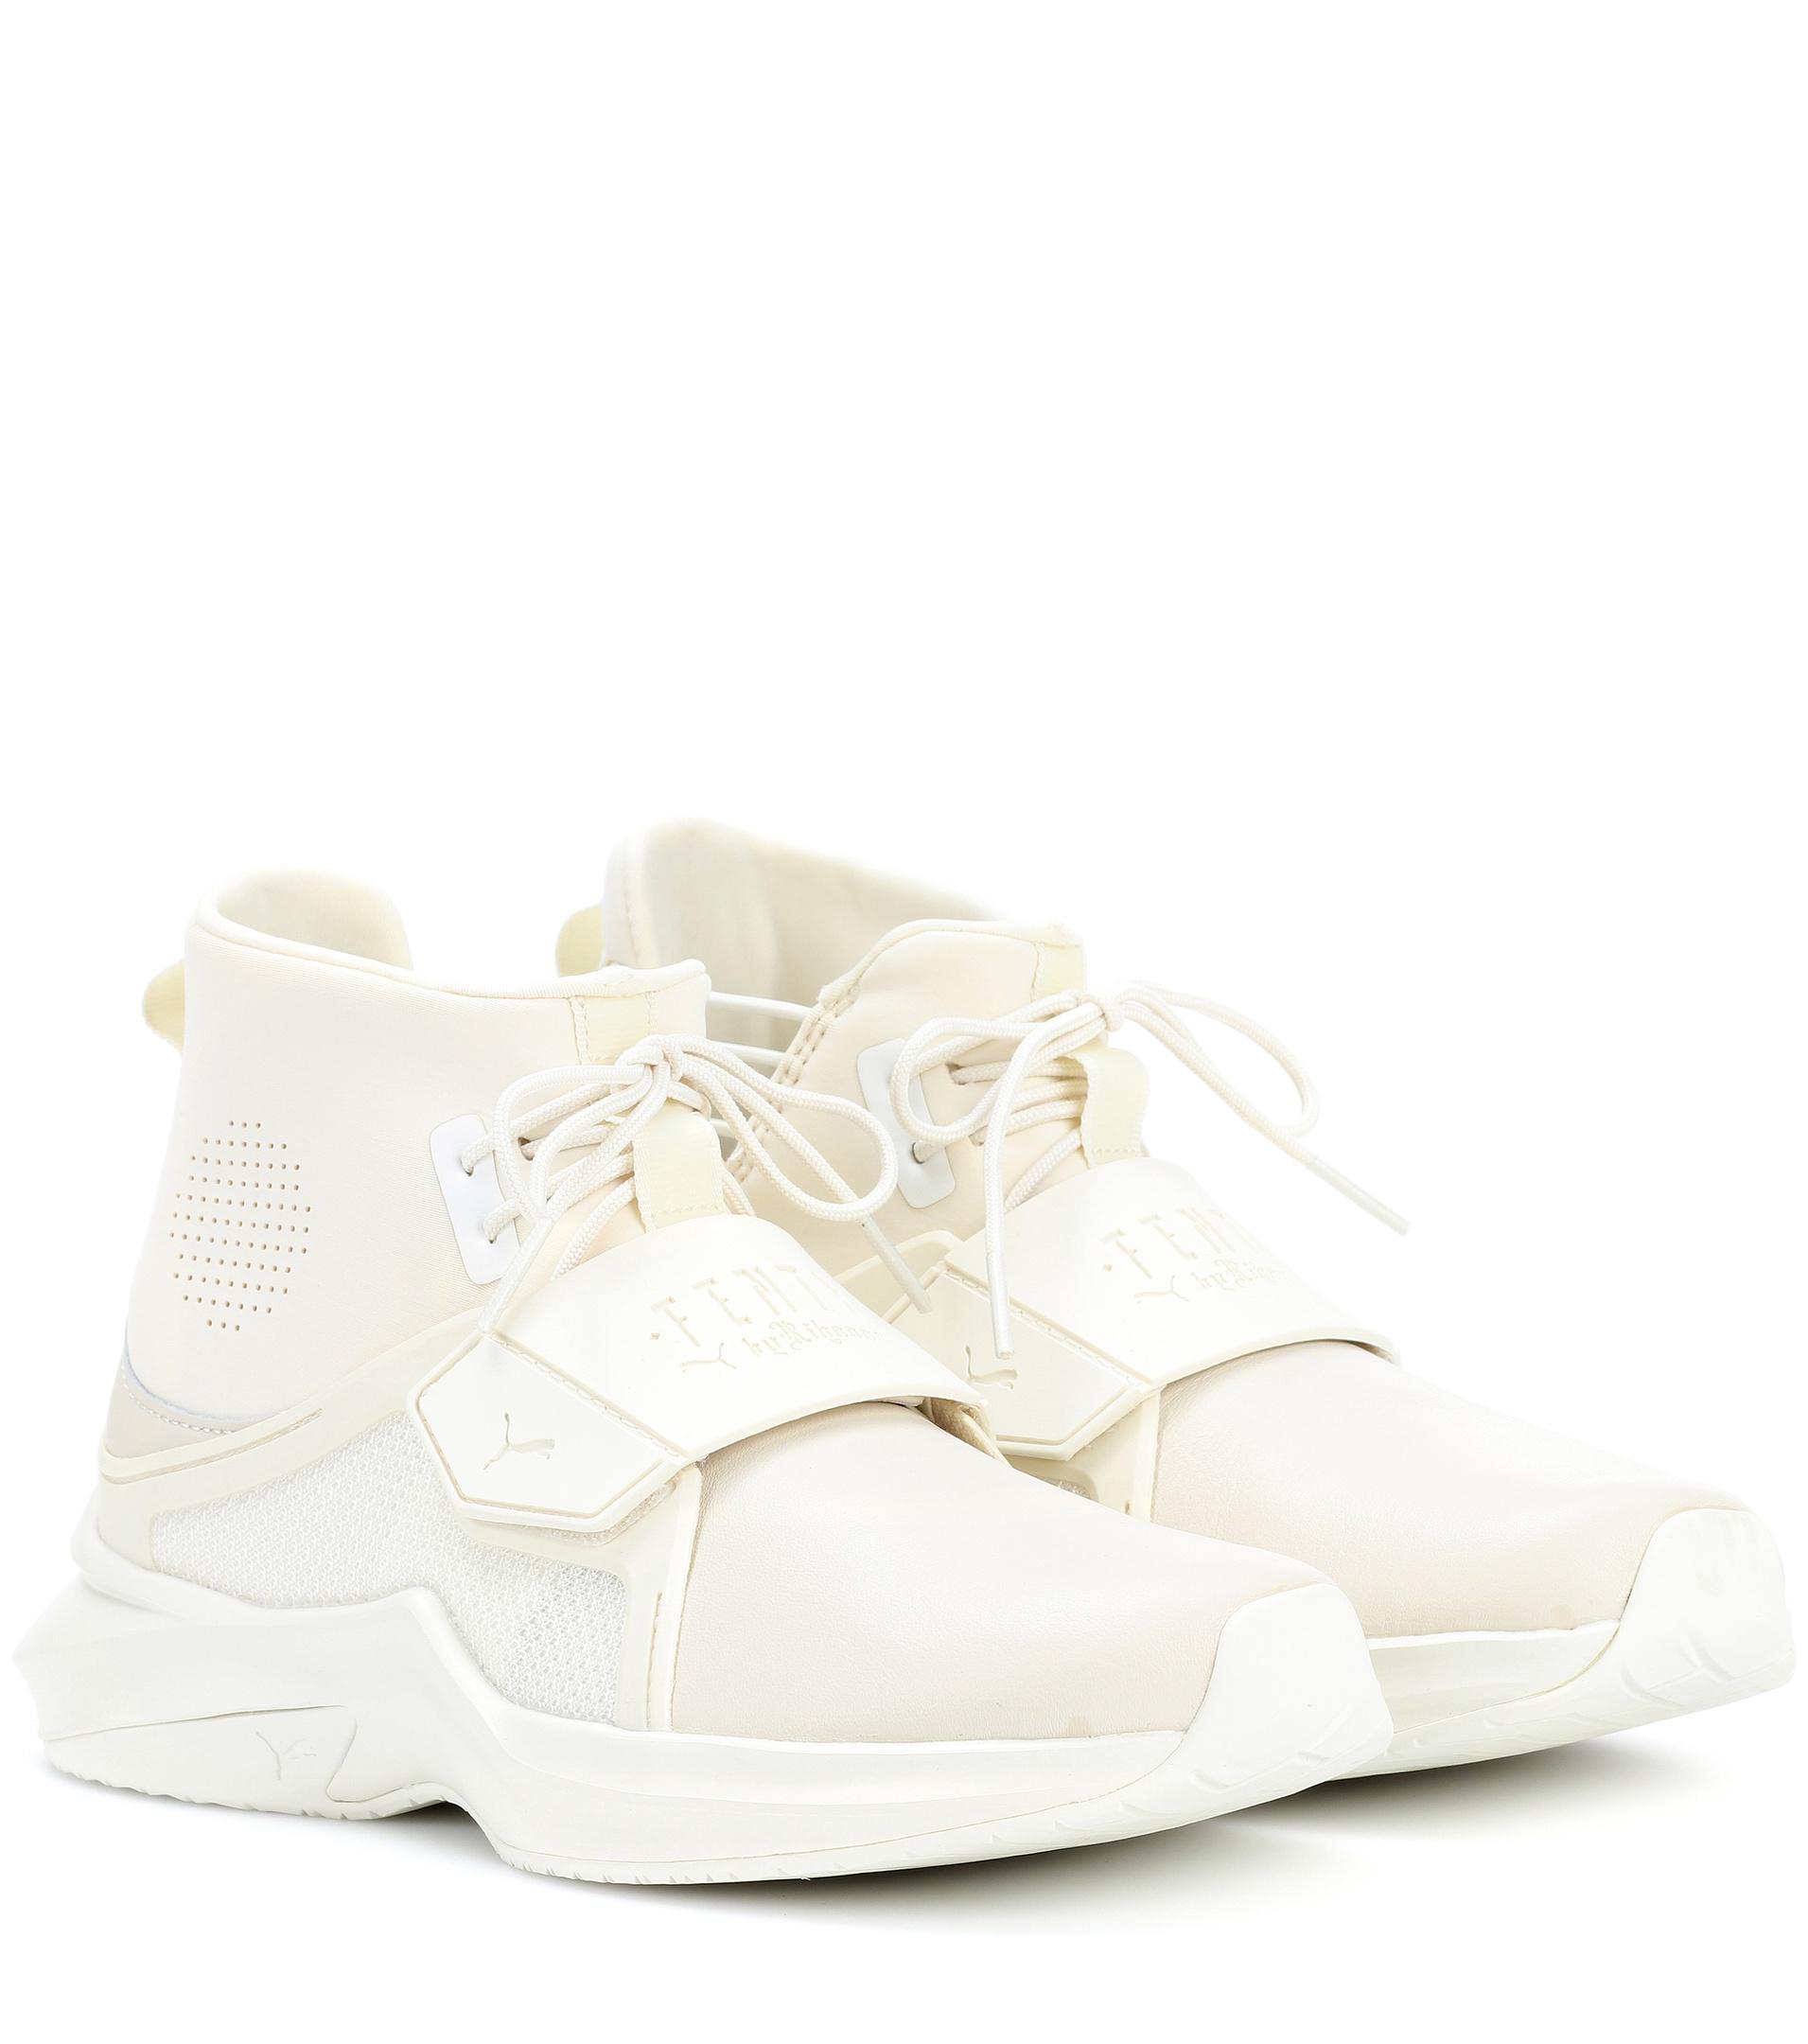 PUMA Leather The Trainer Hi Sneakers in White - Lyst